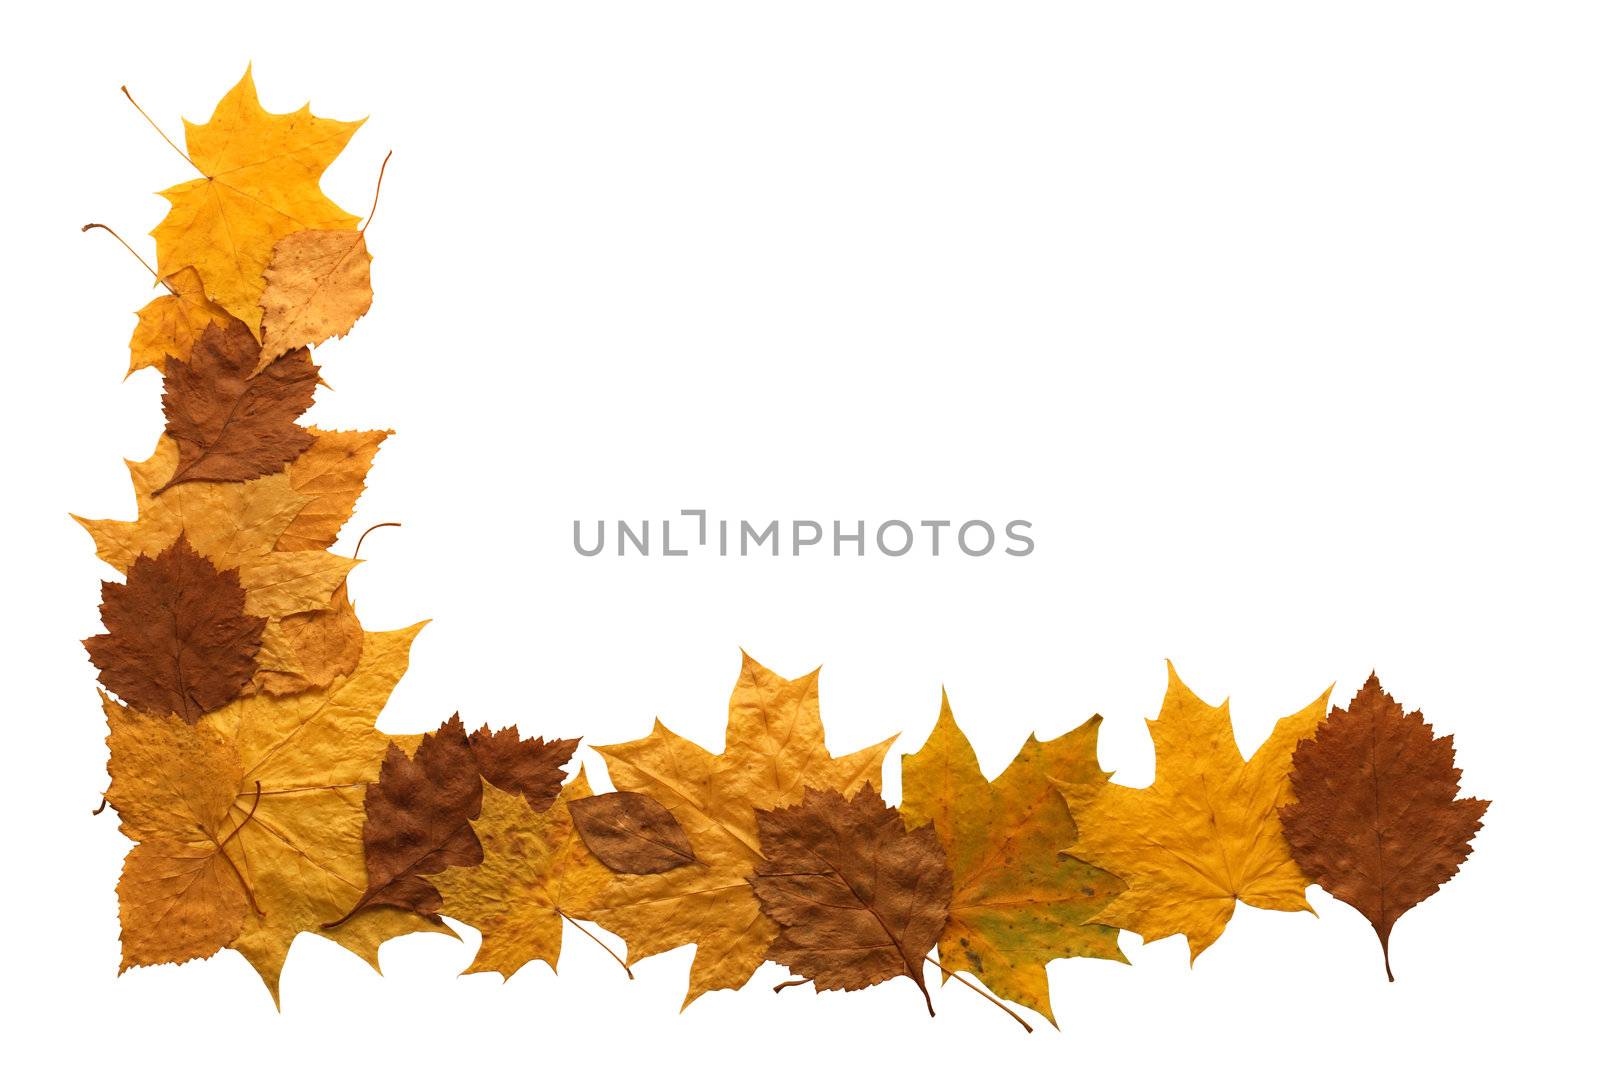 Border made from dry autumn leaves. Isolated with clipping path